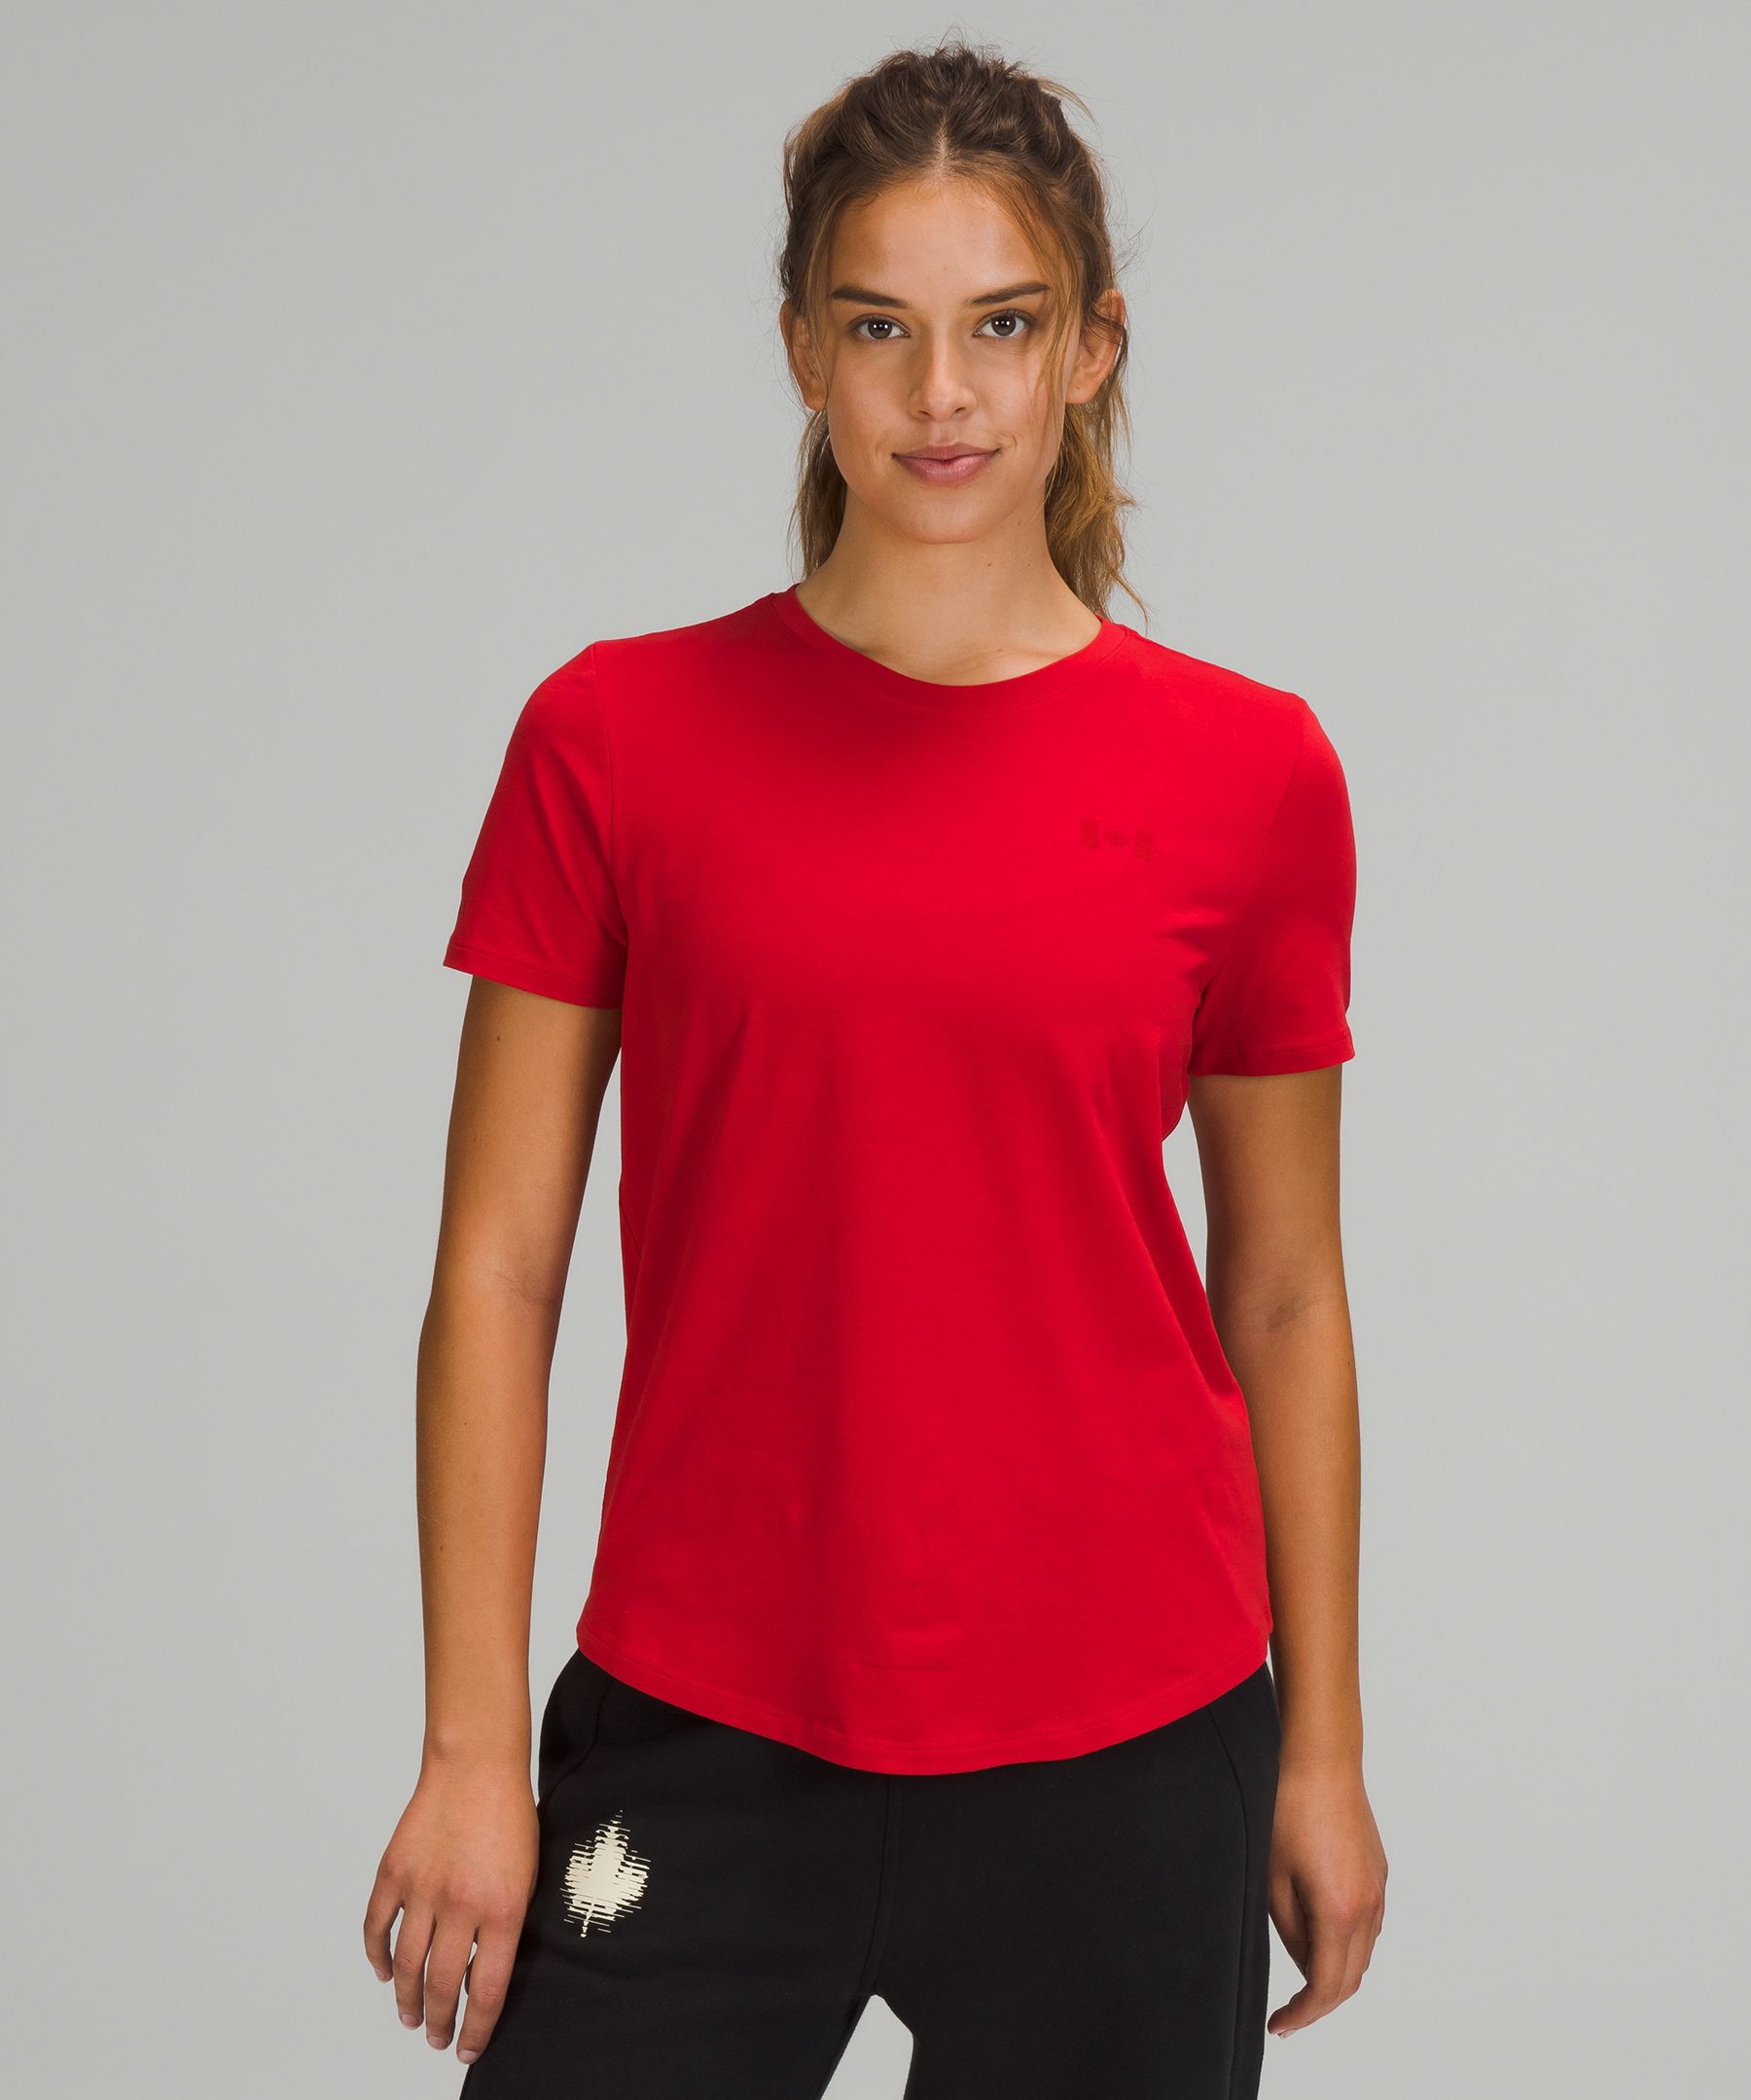 Team Canada x Lululemon Olympic Collection - Sparkles and Shoes